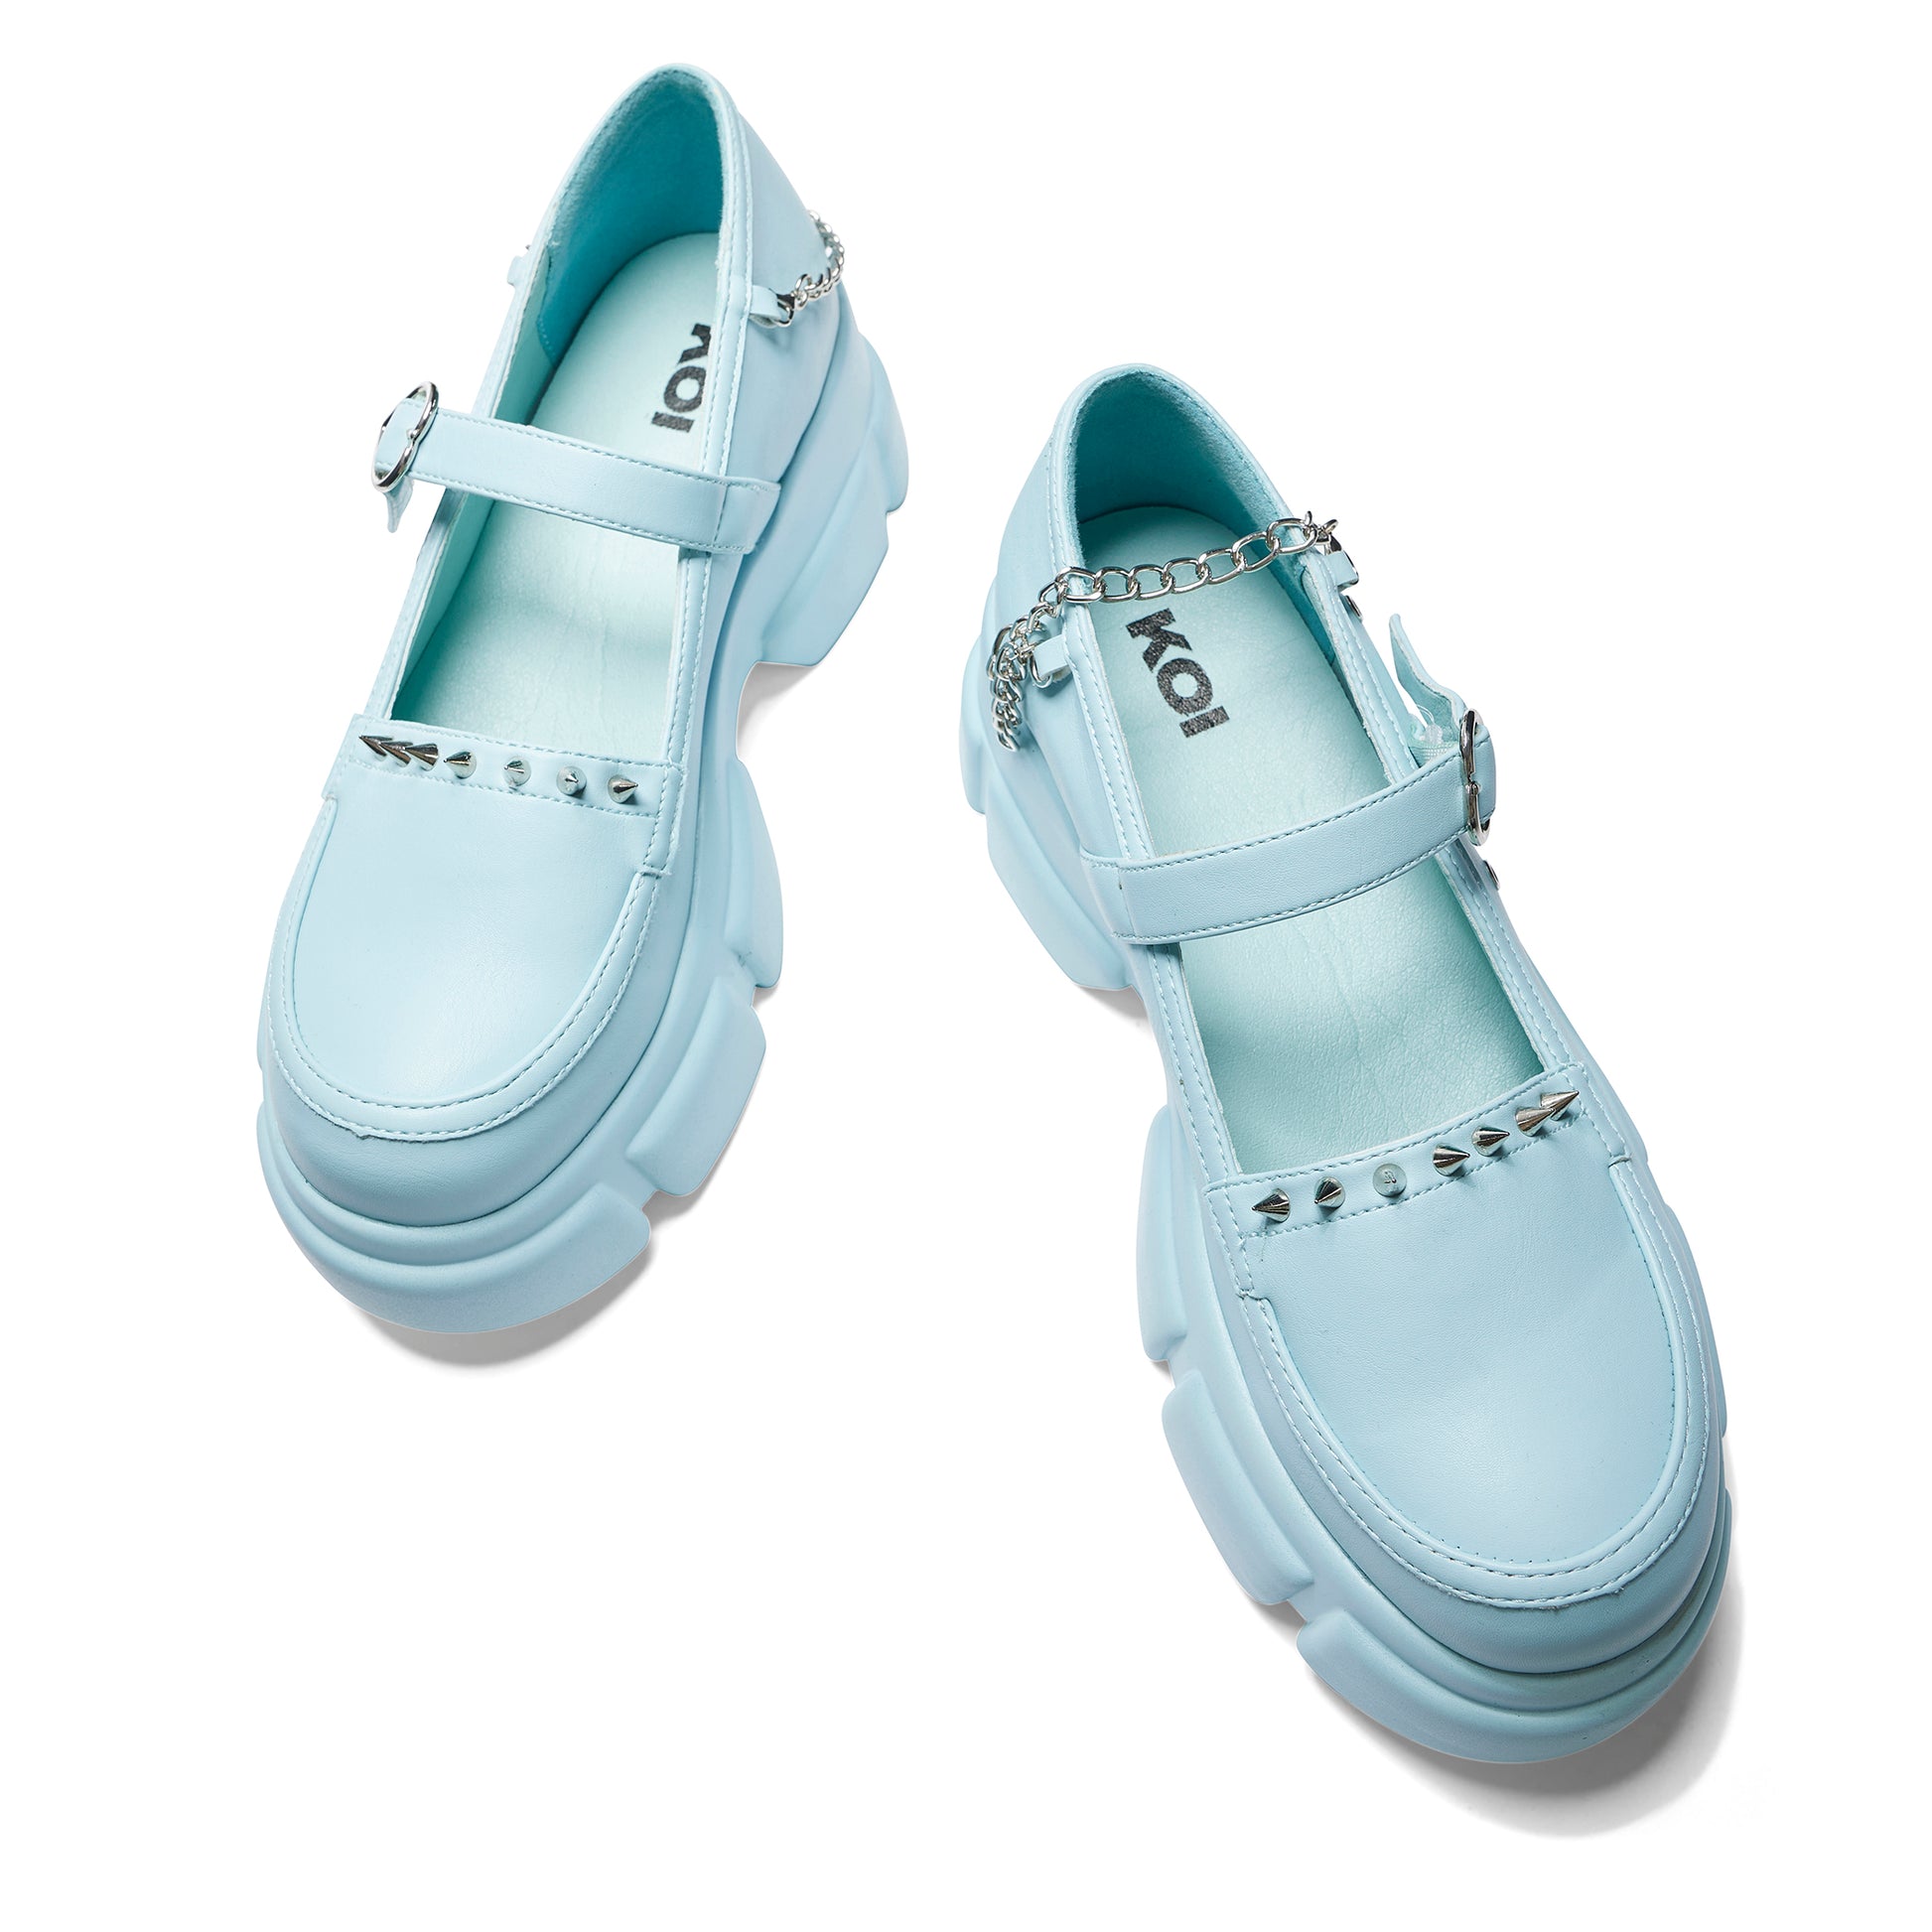 Cloud Mist Chunky Shoes - Baby Blue - Shoes - KOI Footwear - Blue - Top View